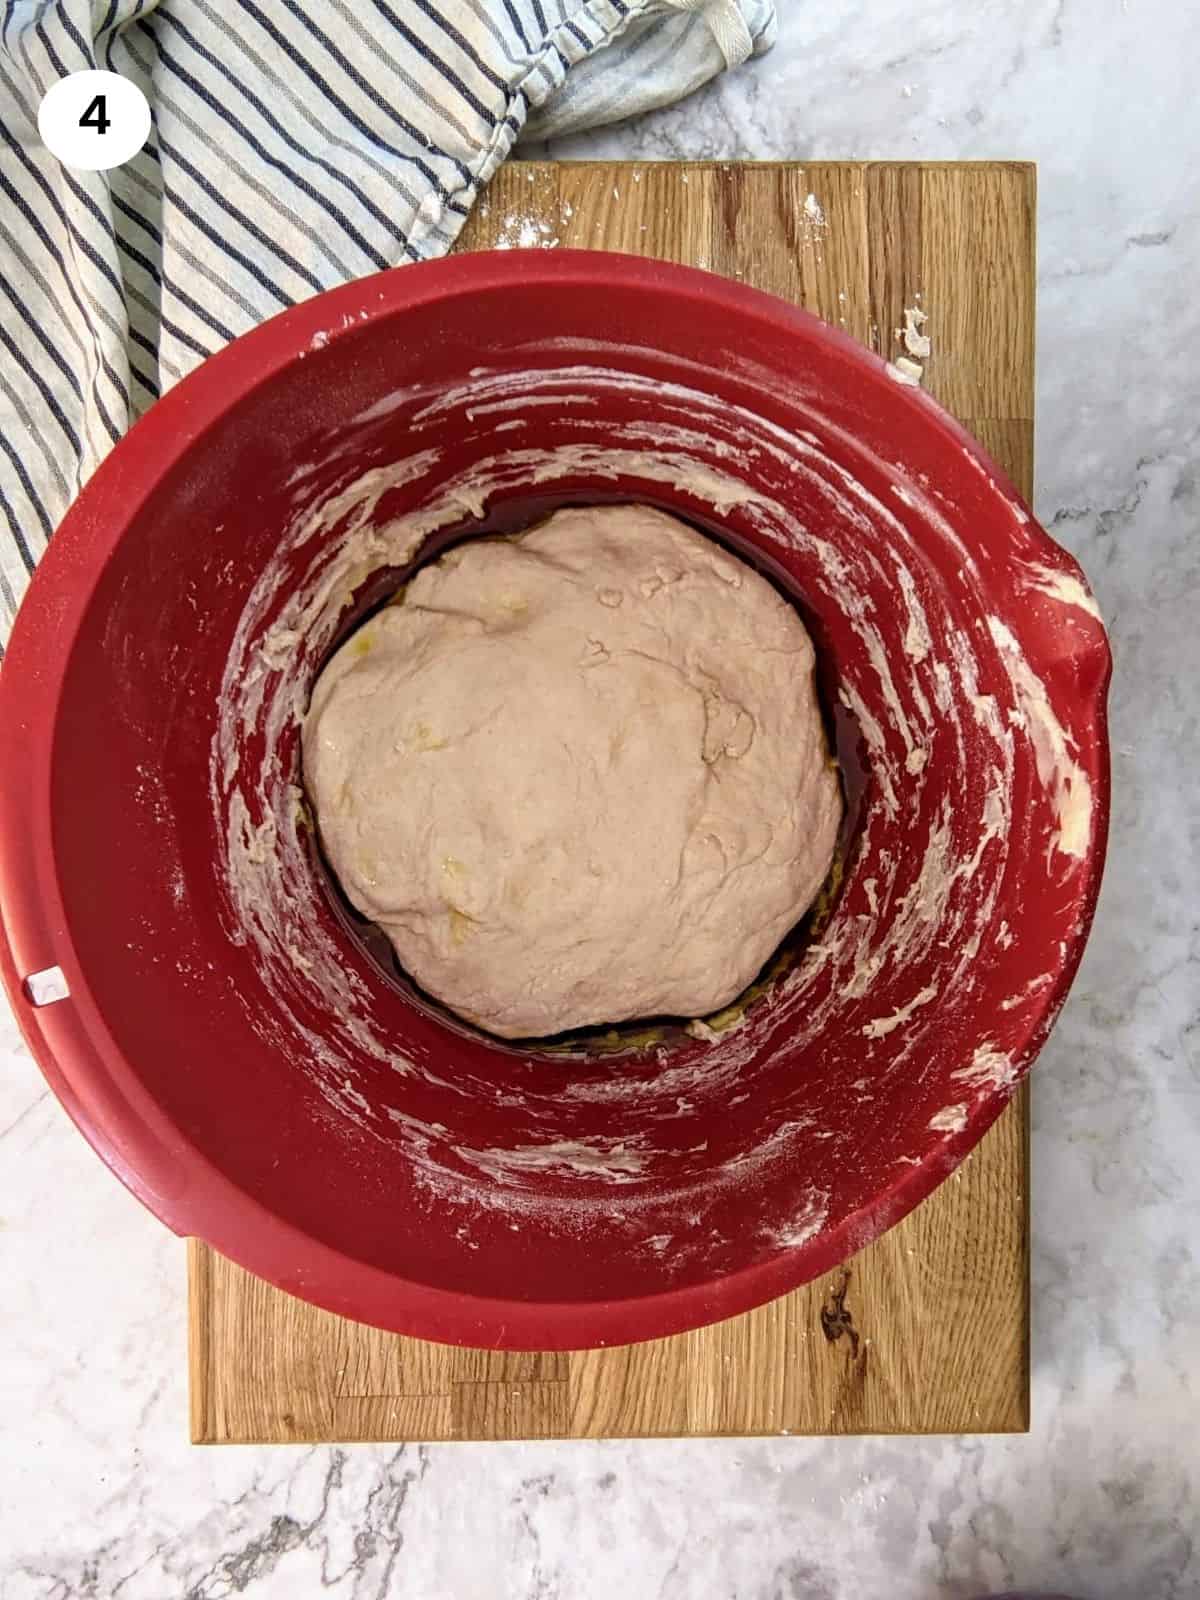 Dough in a bowl ready to rest for an hour.